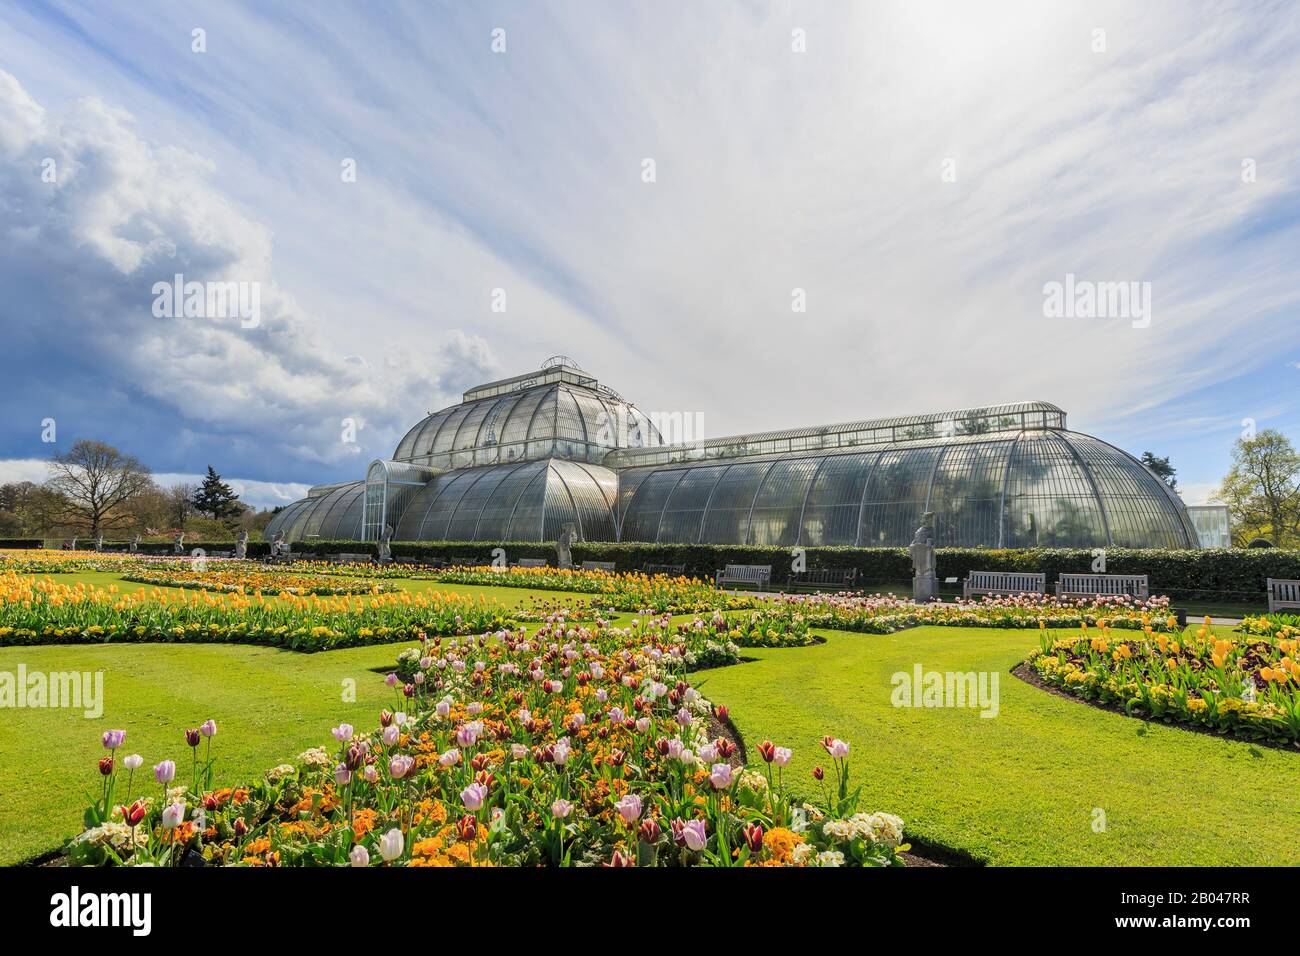 The beautiful Palm House of the Kew Garden at Richmond, United Kingdom Stock Photo